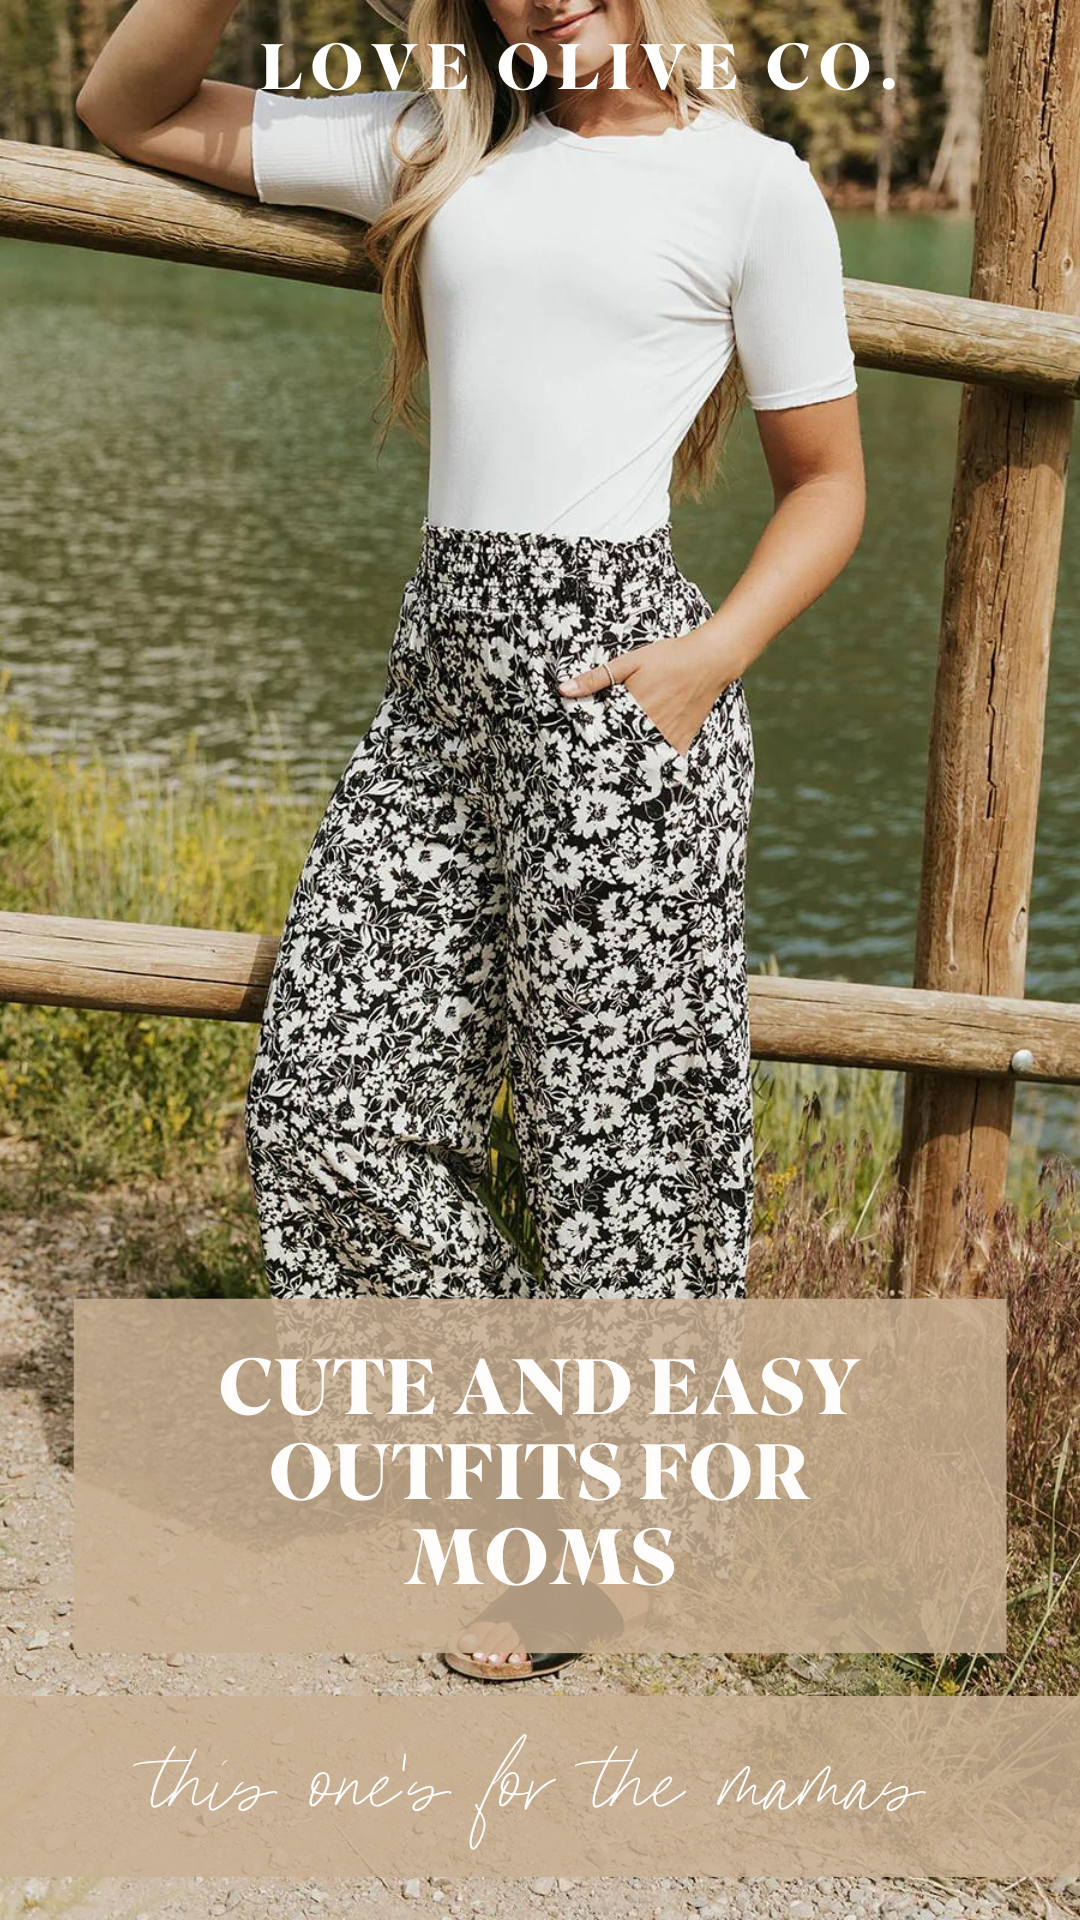 Cute and Easy Outfits for Moms. www.loveoliveco.com